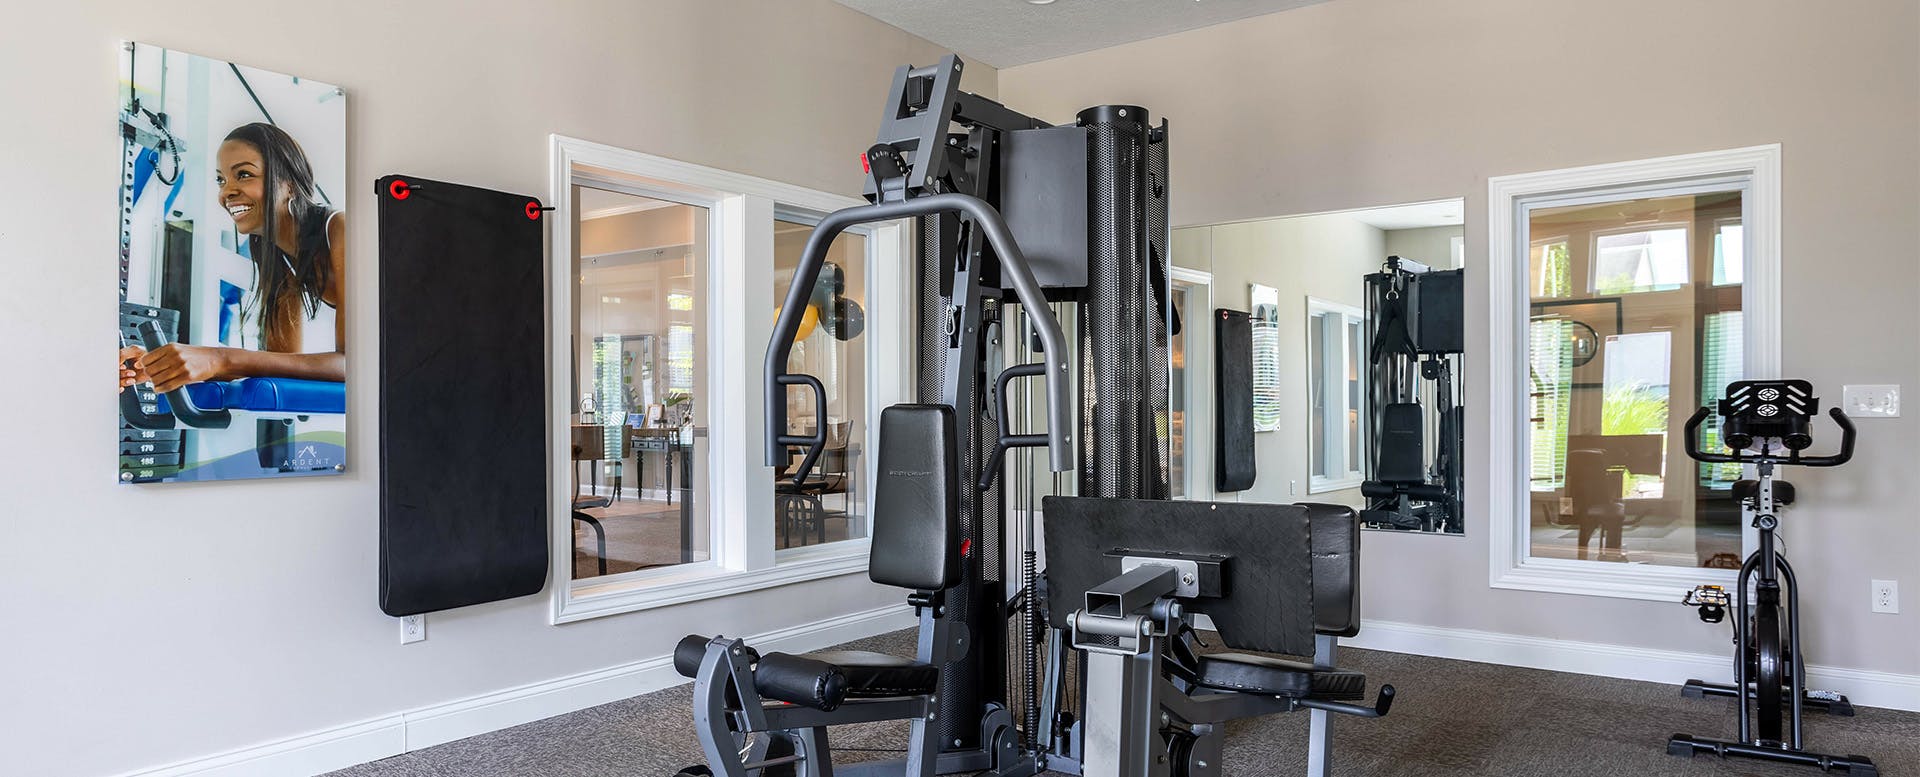 A modern community workout center with exercise equipment and natural light.